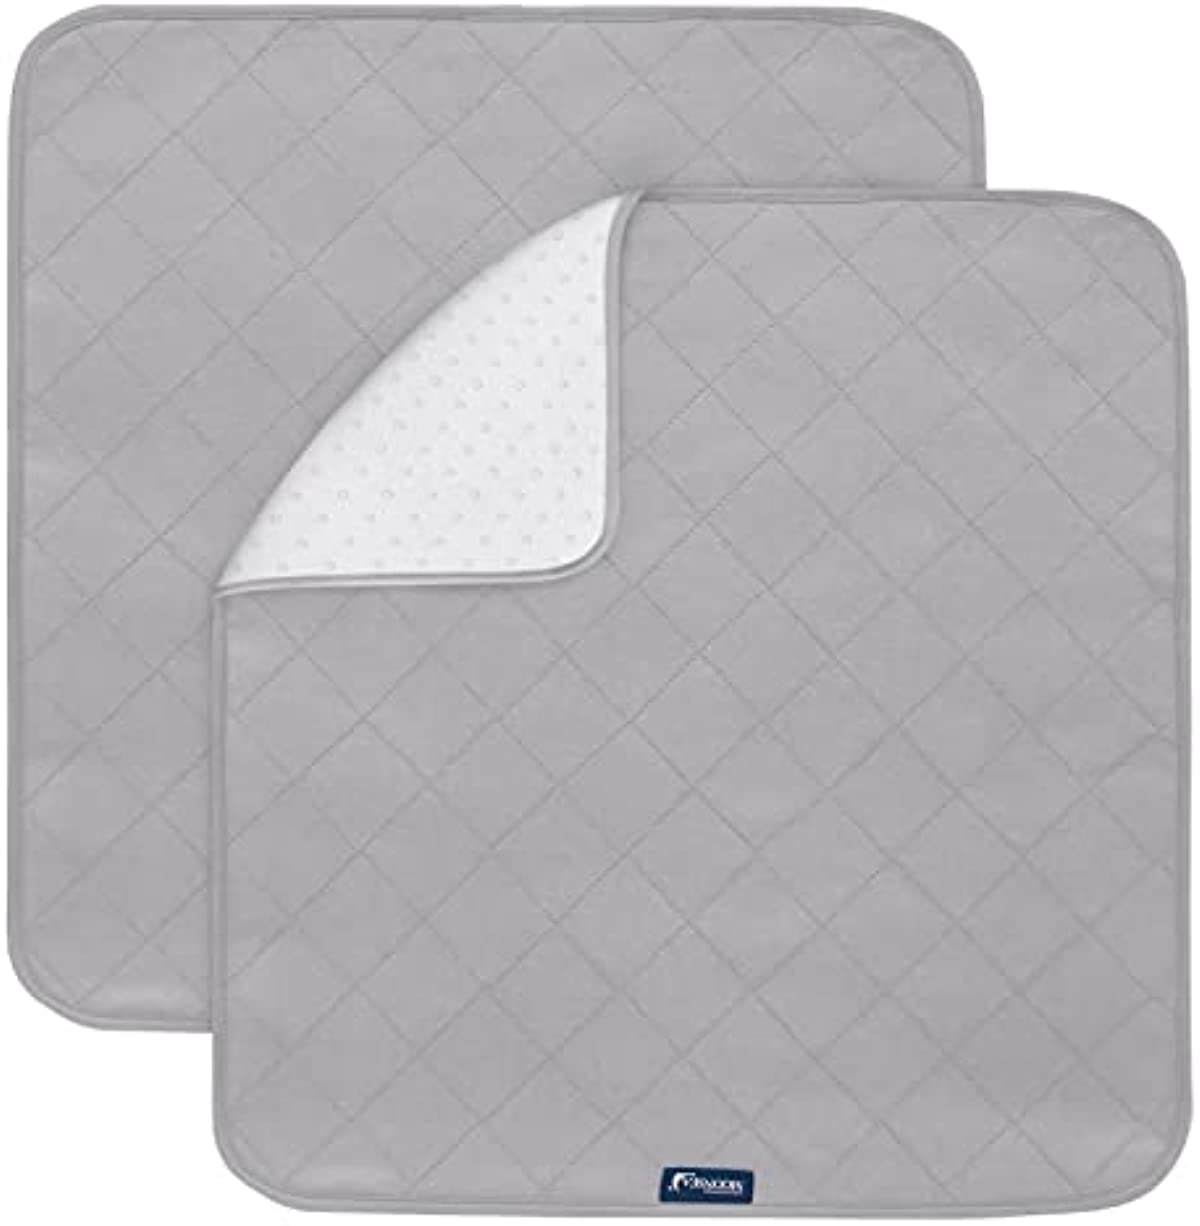 Waterproof Incontinence Chair Pads 2 Pack Non Slip Absorbent Pads, 22\" x 21\" Wheelchair Reusable Seat Pads Cover, Washable Nursery Pee Pad Seat Protector - Gray